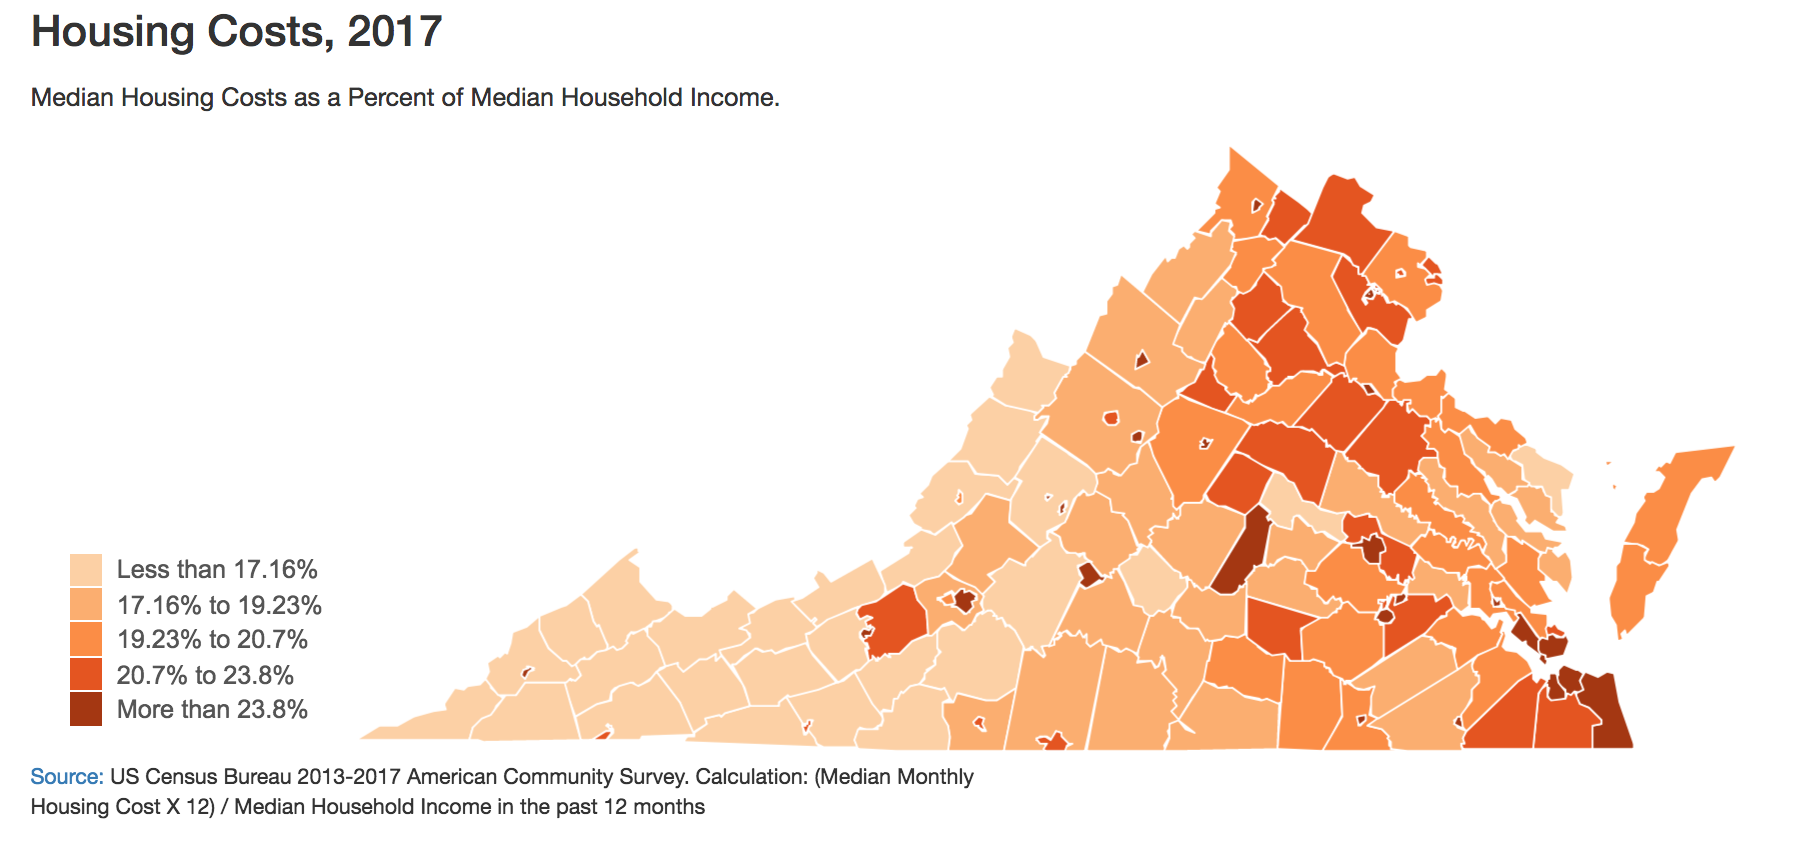 Median Virginia Housing Costs as a Percent of Median Household